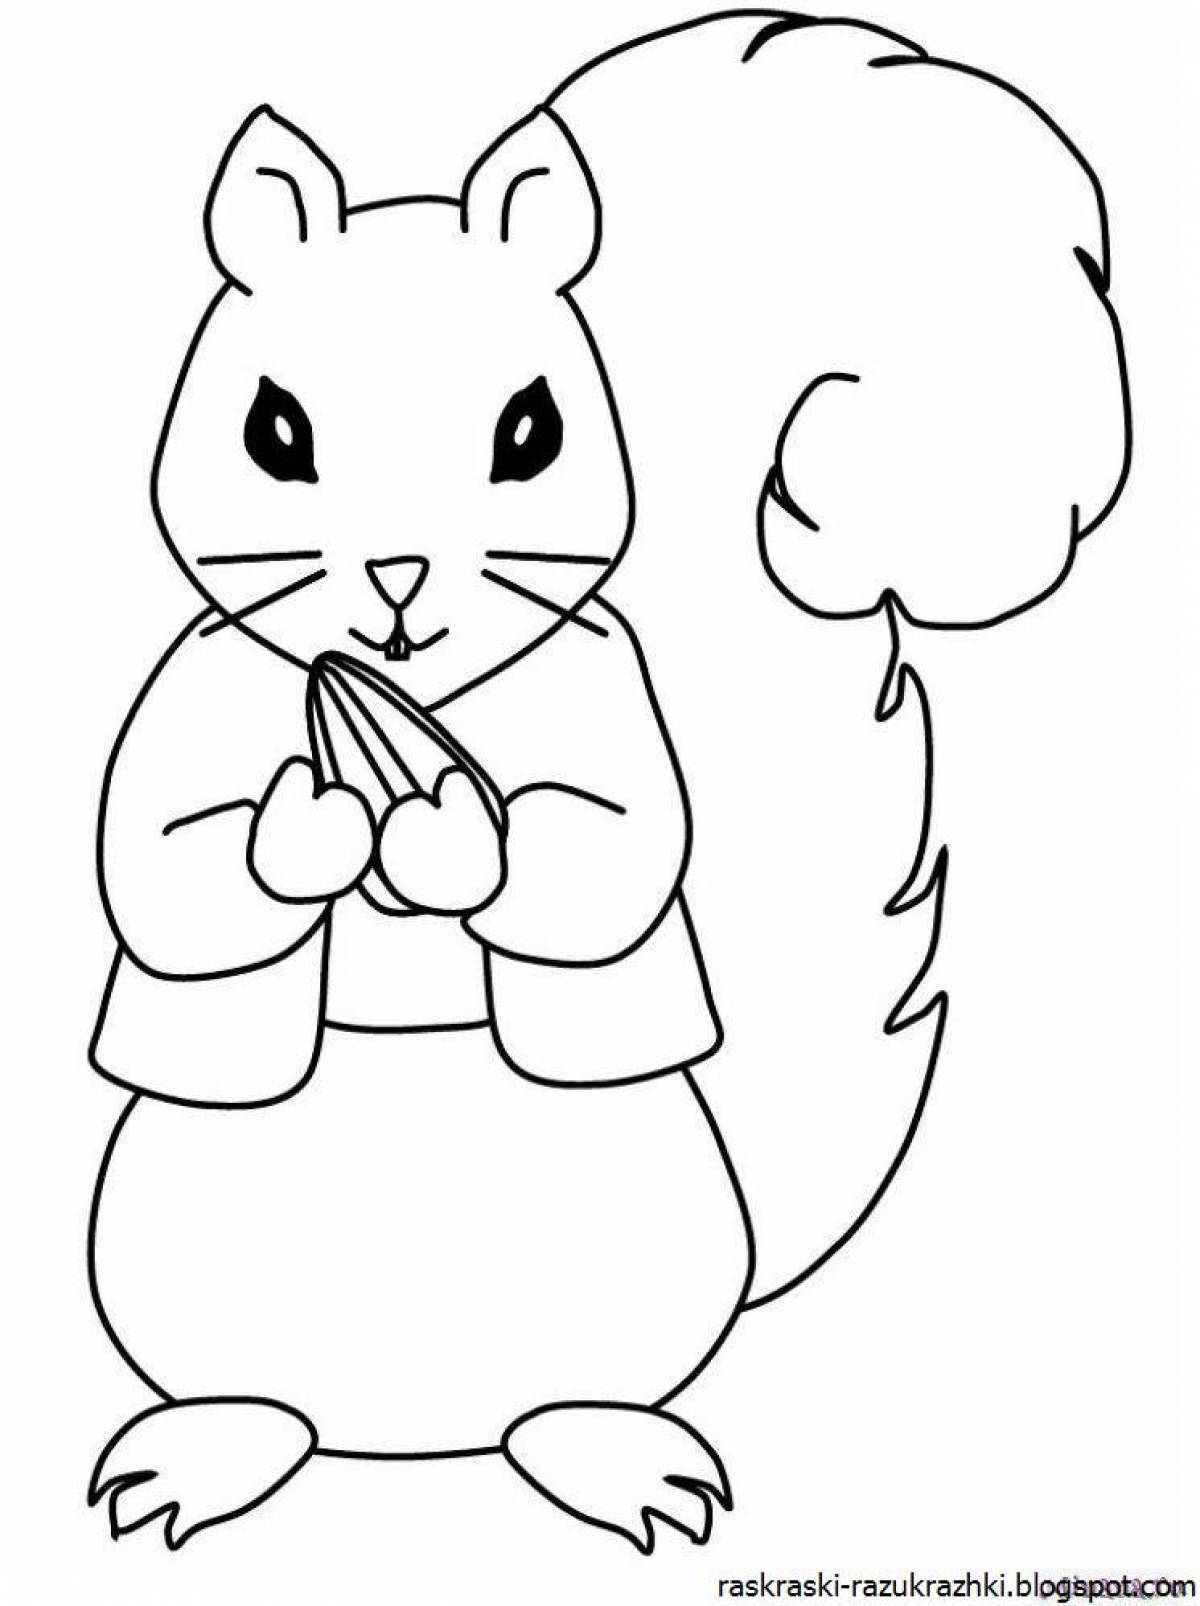 Live squirrel coloring for kids